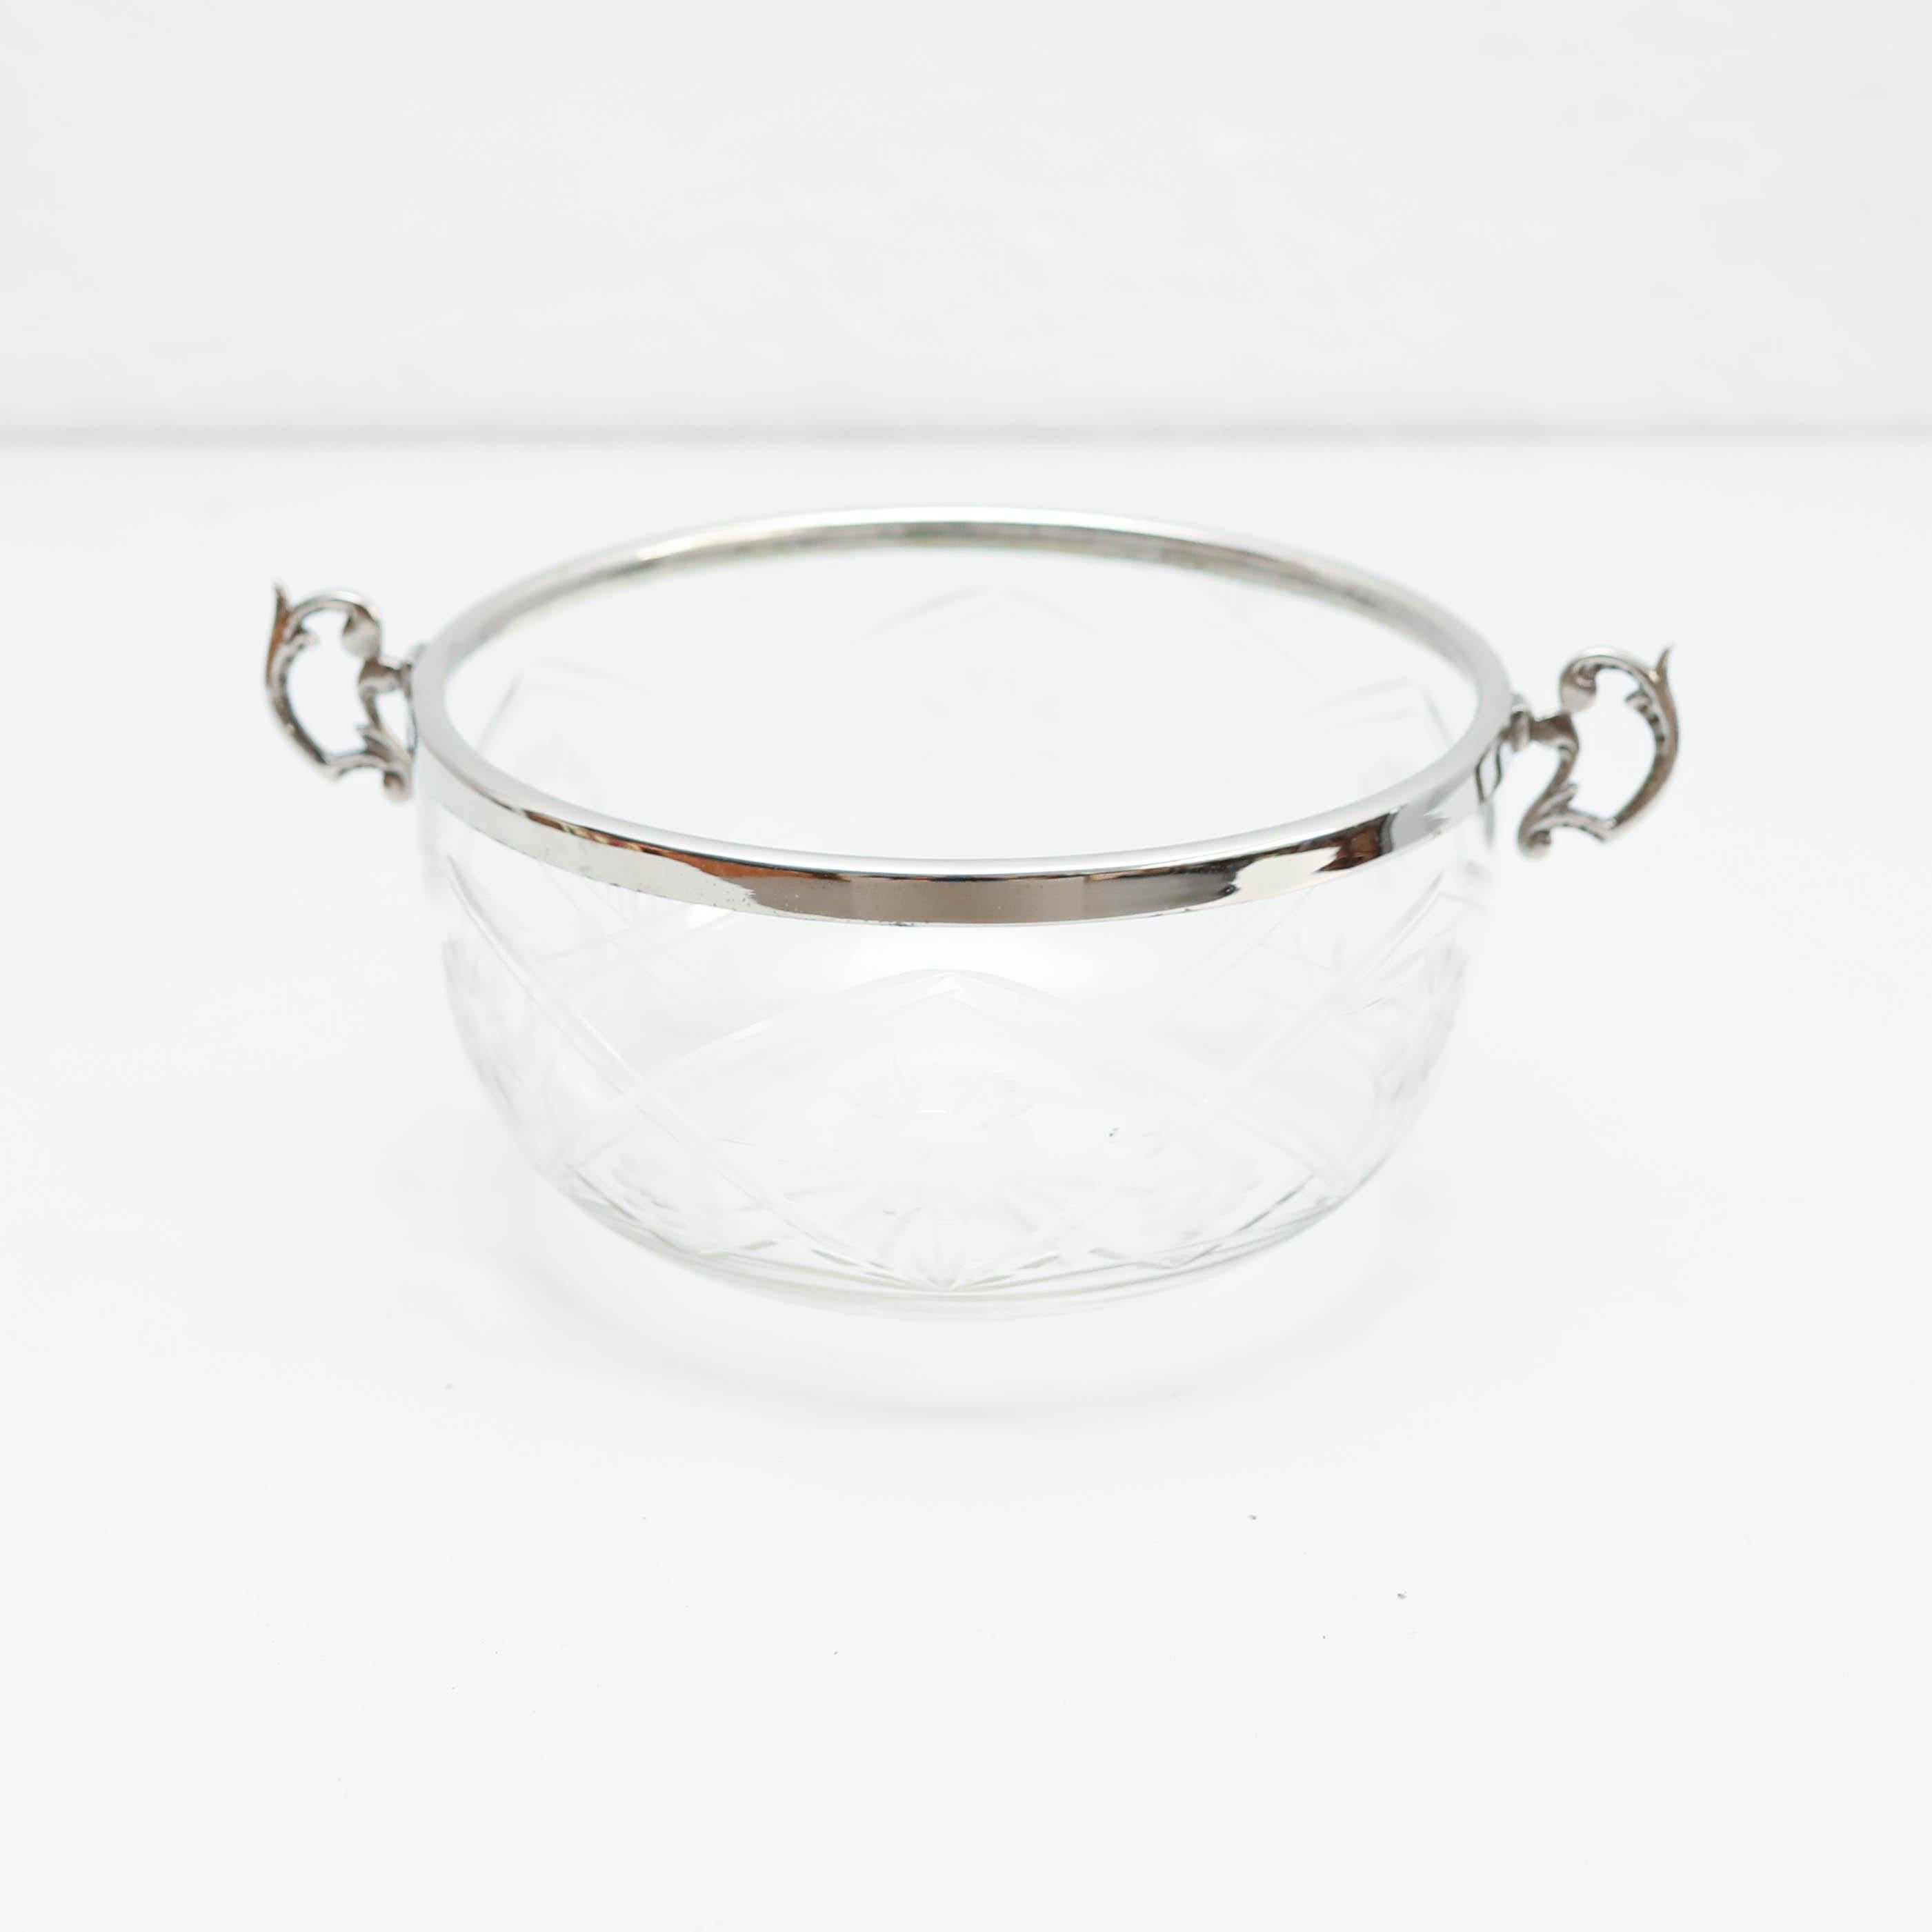 Crystal fruit bowl.
By unknown manufacturer from Spain, circa 1930.

In original condition, with minor wear consistent with age and use, preserving a beautiful patina.

Material:
Glass
Metal

Dimensions:
H 11 cm x W 21 cm x D 27 cm.